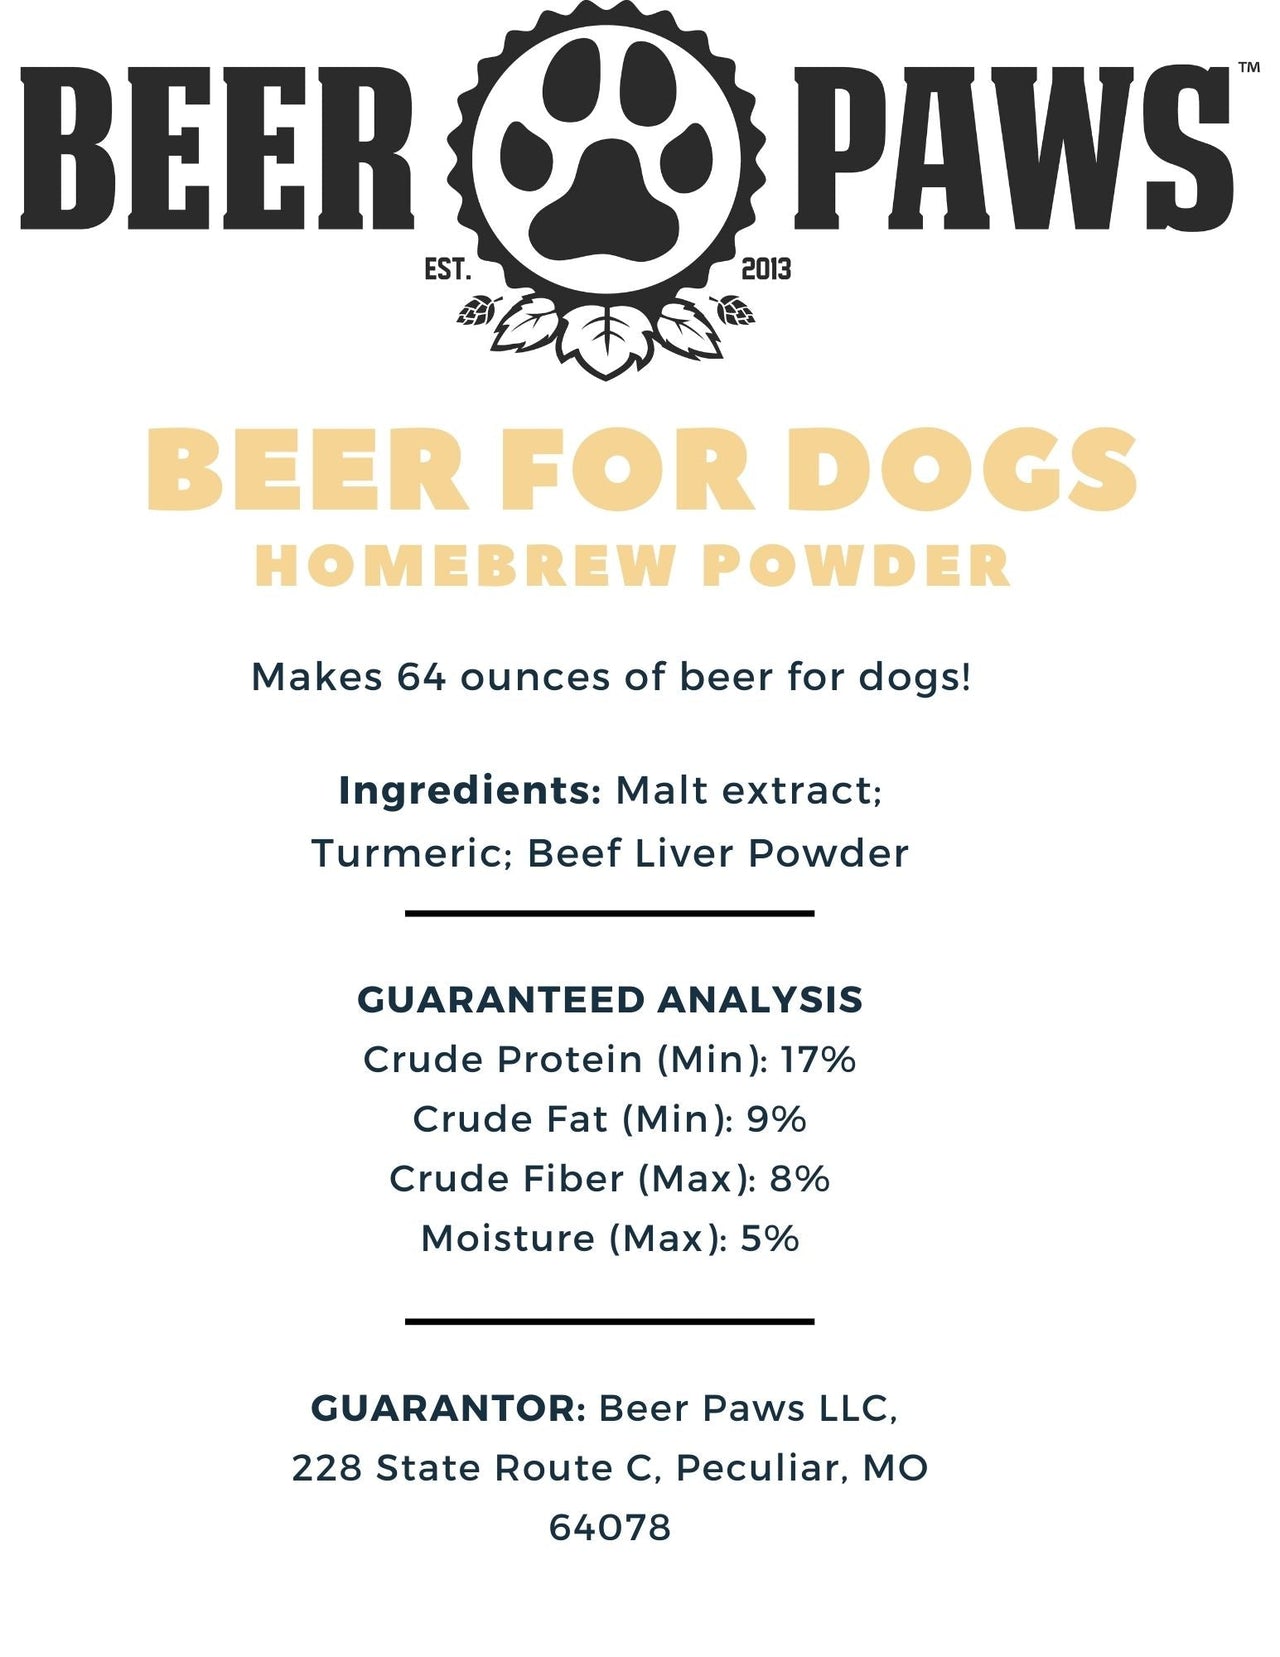 Beer for Dogs Homebrew Powder